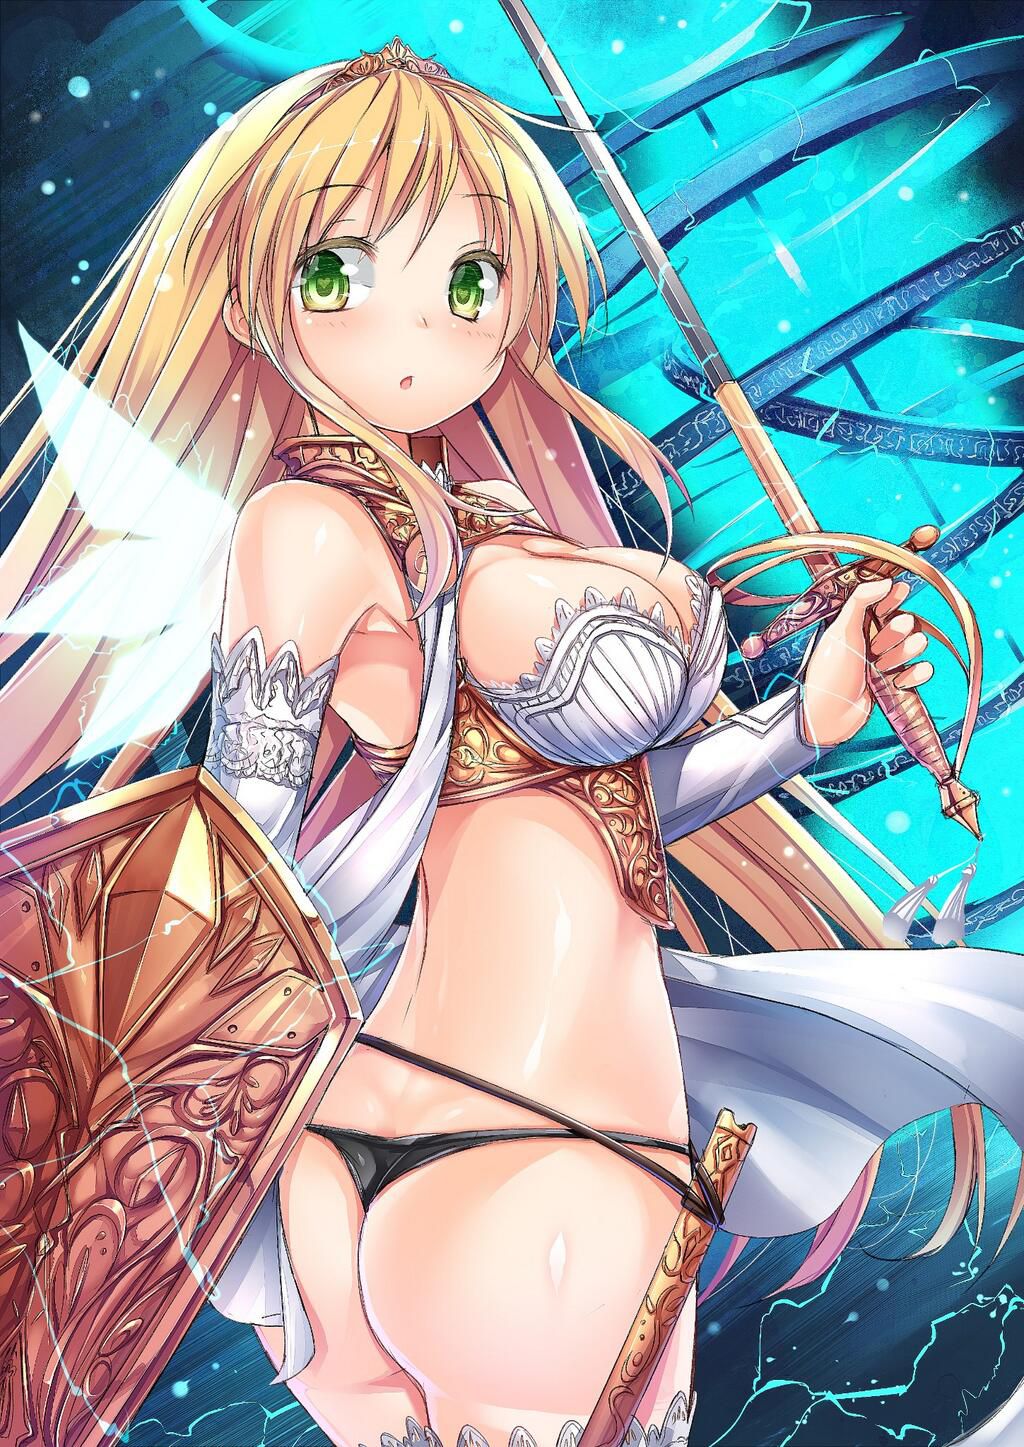 [Secondary erotic] Second erotic images of girls with weapons 1 [swords, etc.] 32